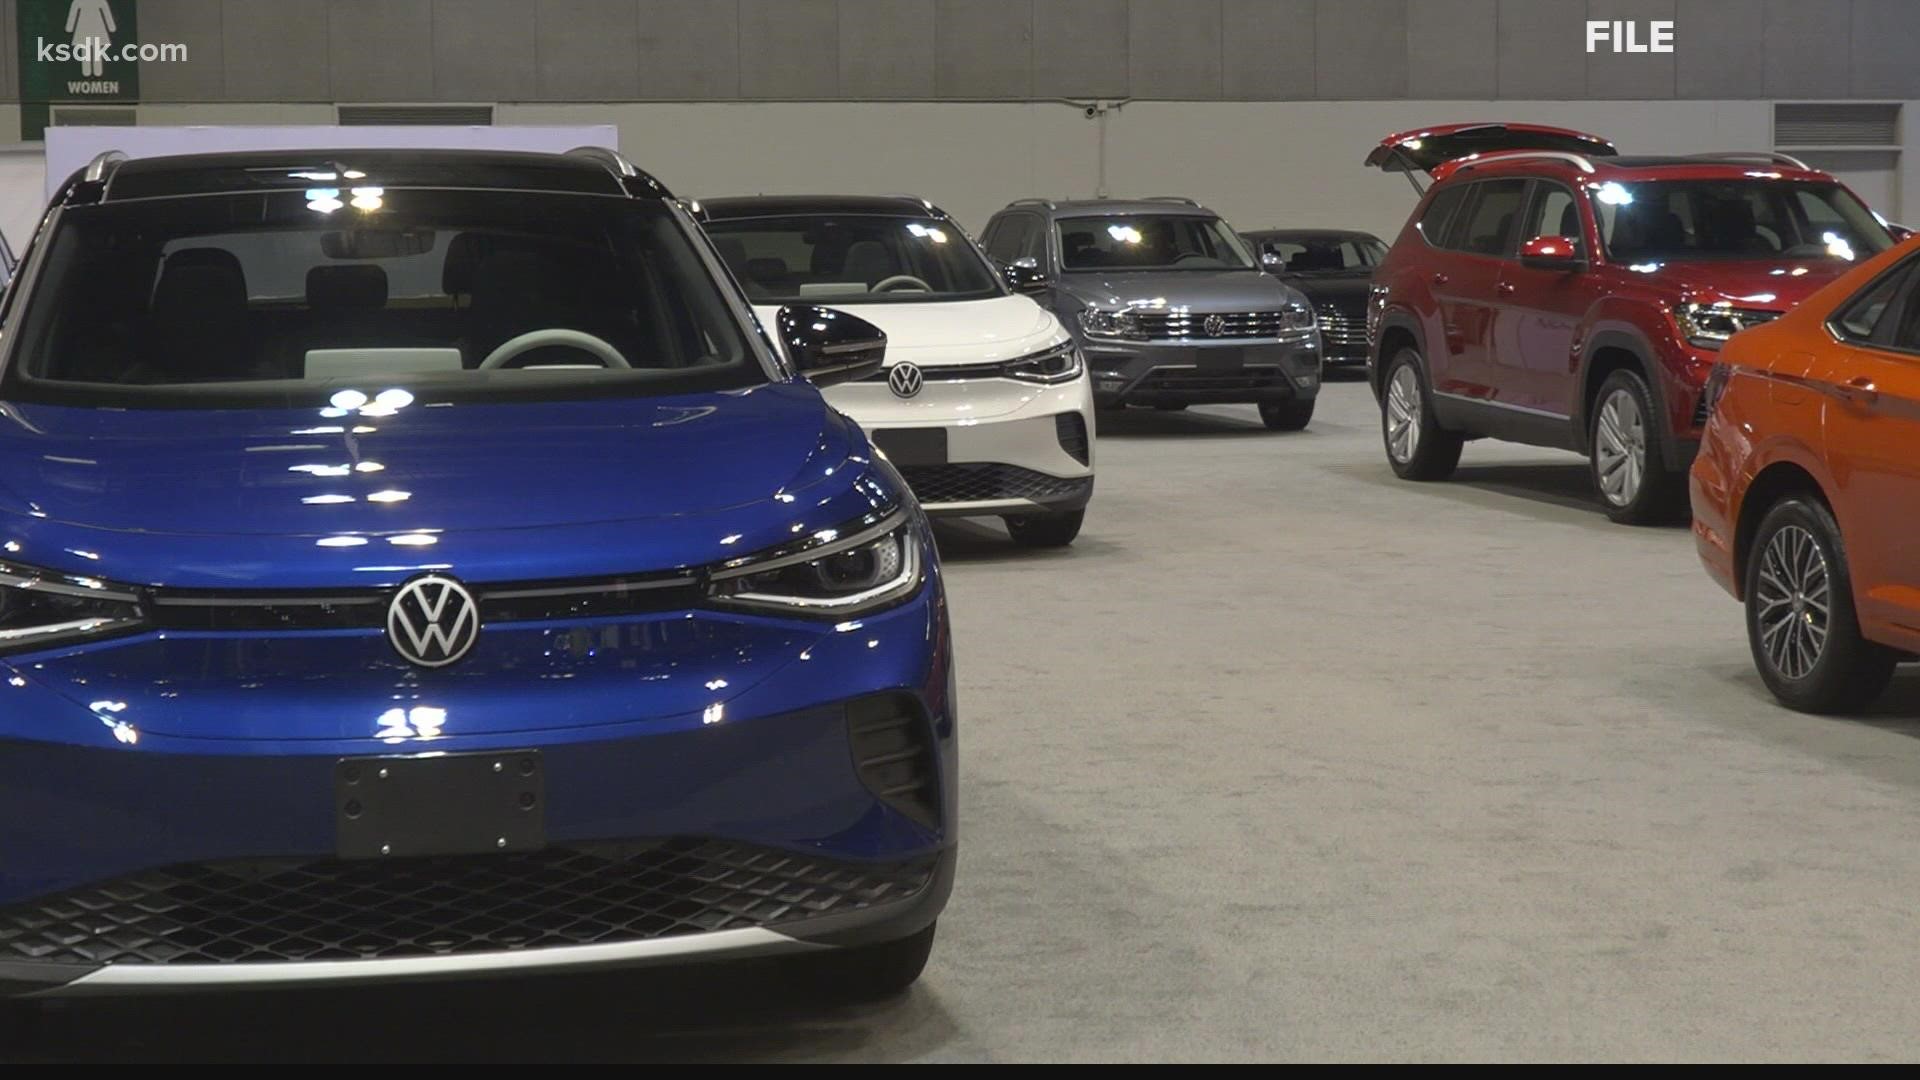 The Saint Louis Auto Show returns to America’s Center this weekend